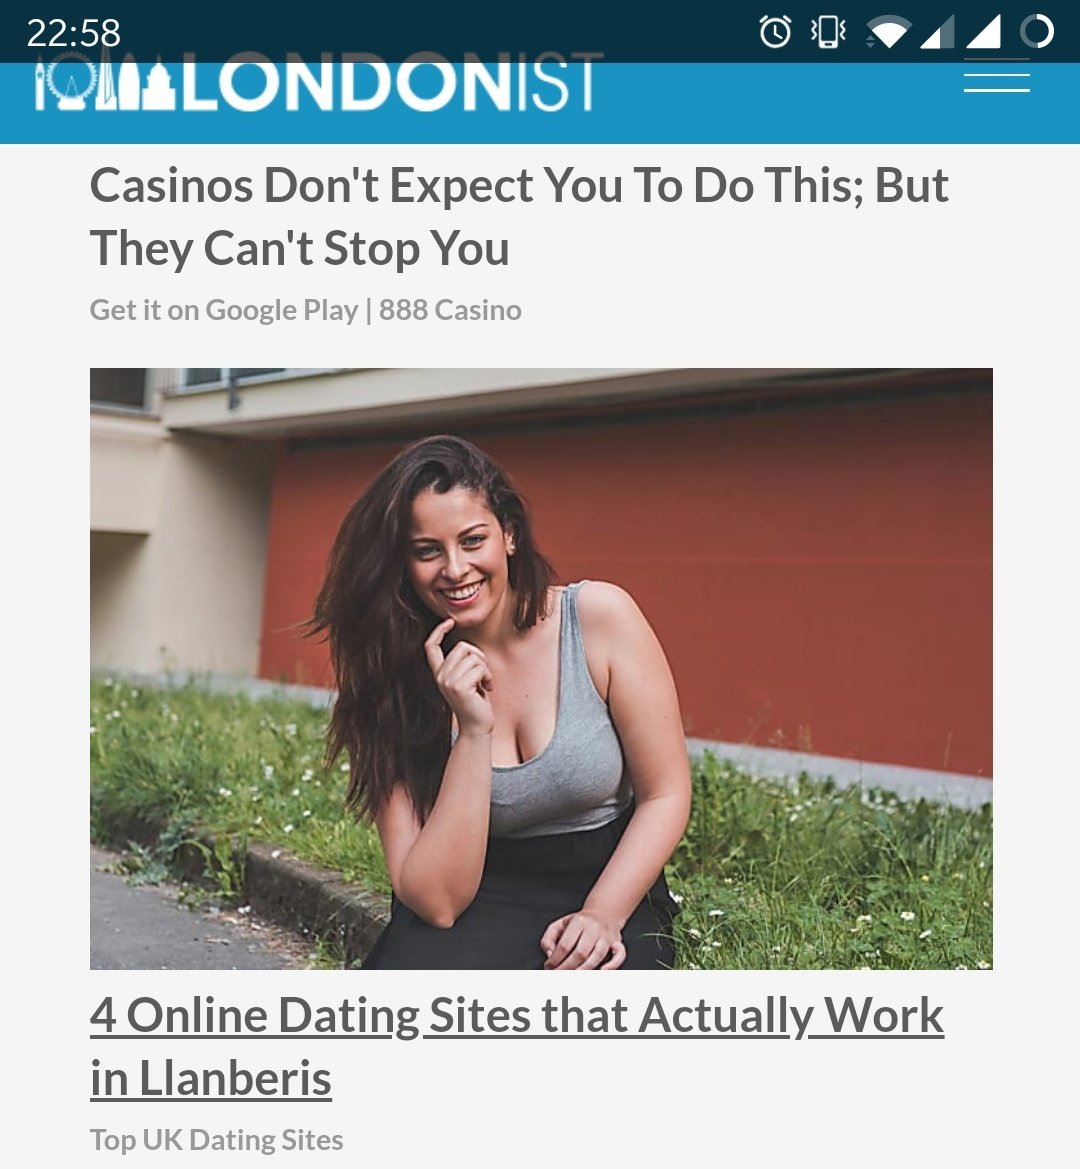 which dating sites actually work